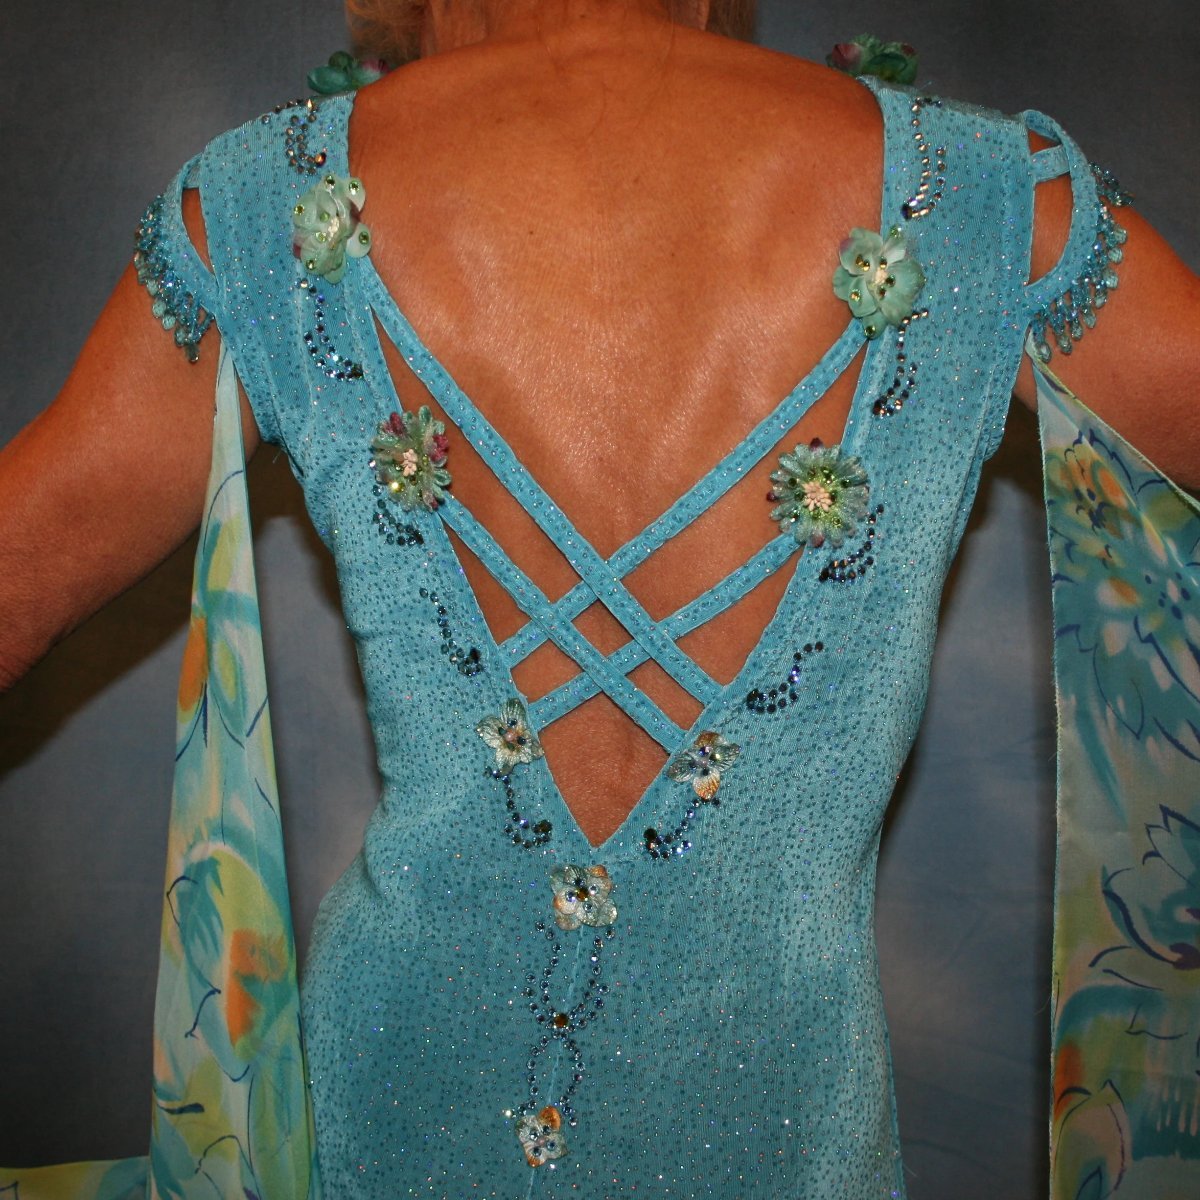 Crystal's Creations close up back view of Turquoise ballroom dress of turquoise glitter slinky features lattice work detailing with yards & yards of print chiffon, enhanced with velveteen flowers plus aquamarine Swarovski rhinestones, hand beading on shoulder detailing... with detachable floats.